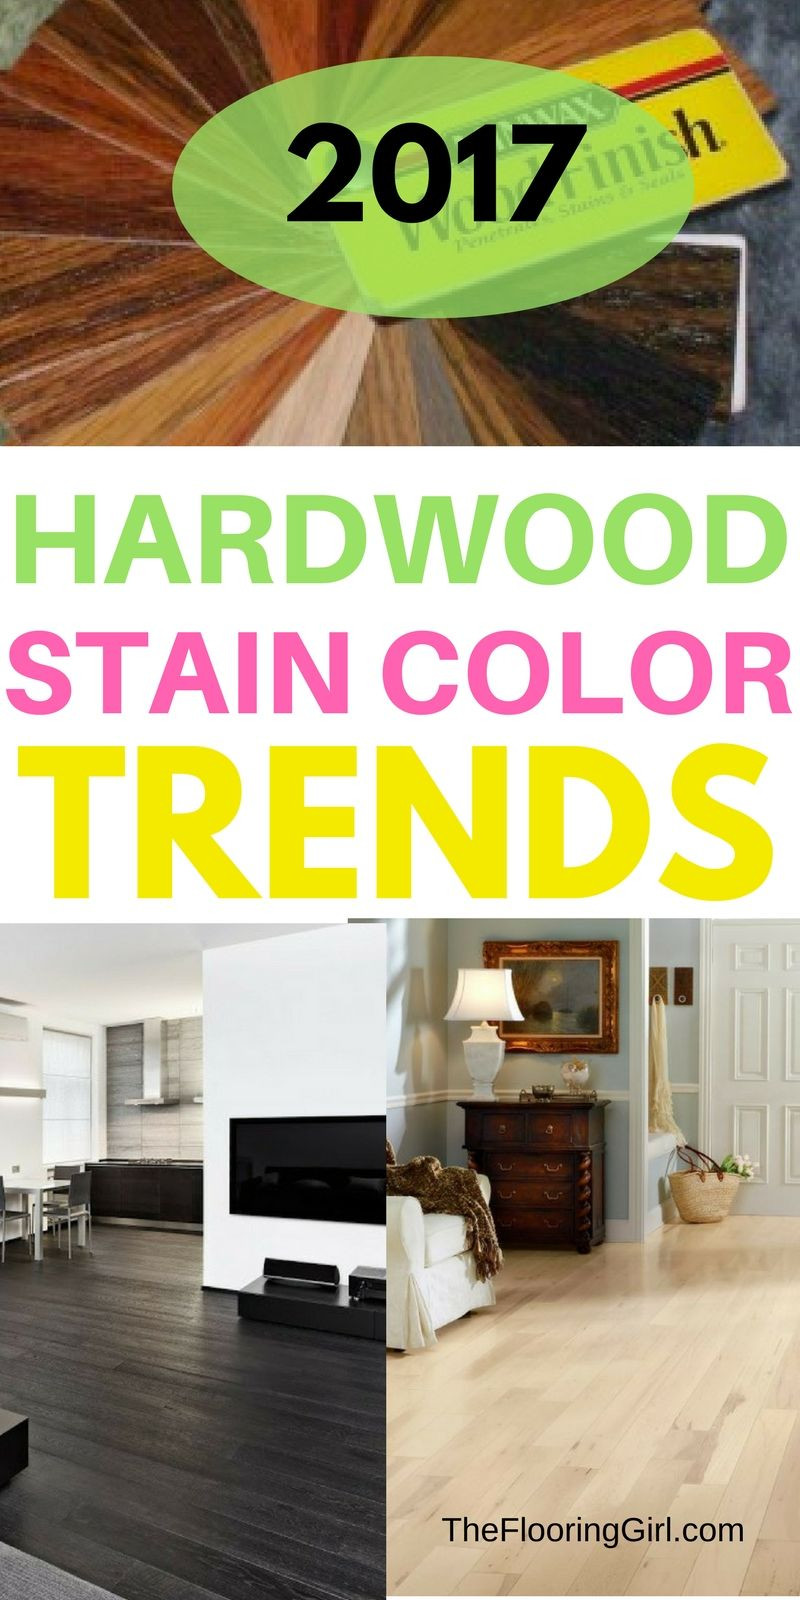 17 attractive Sanding Hardwood Floors before and after 2024 free download sanding hardwood floors before and after of hardwood flooring stain color trends 2018 more from the flooring throughout hardwood flooring stain color trends for 2017 hardwood colors that are